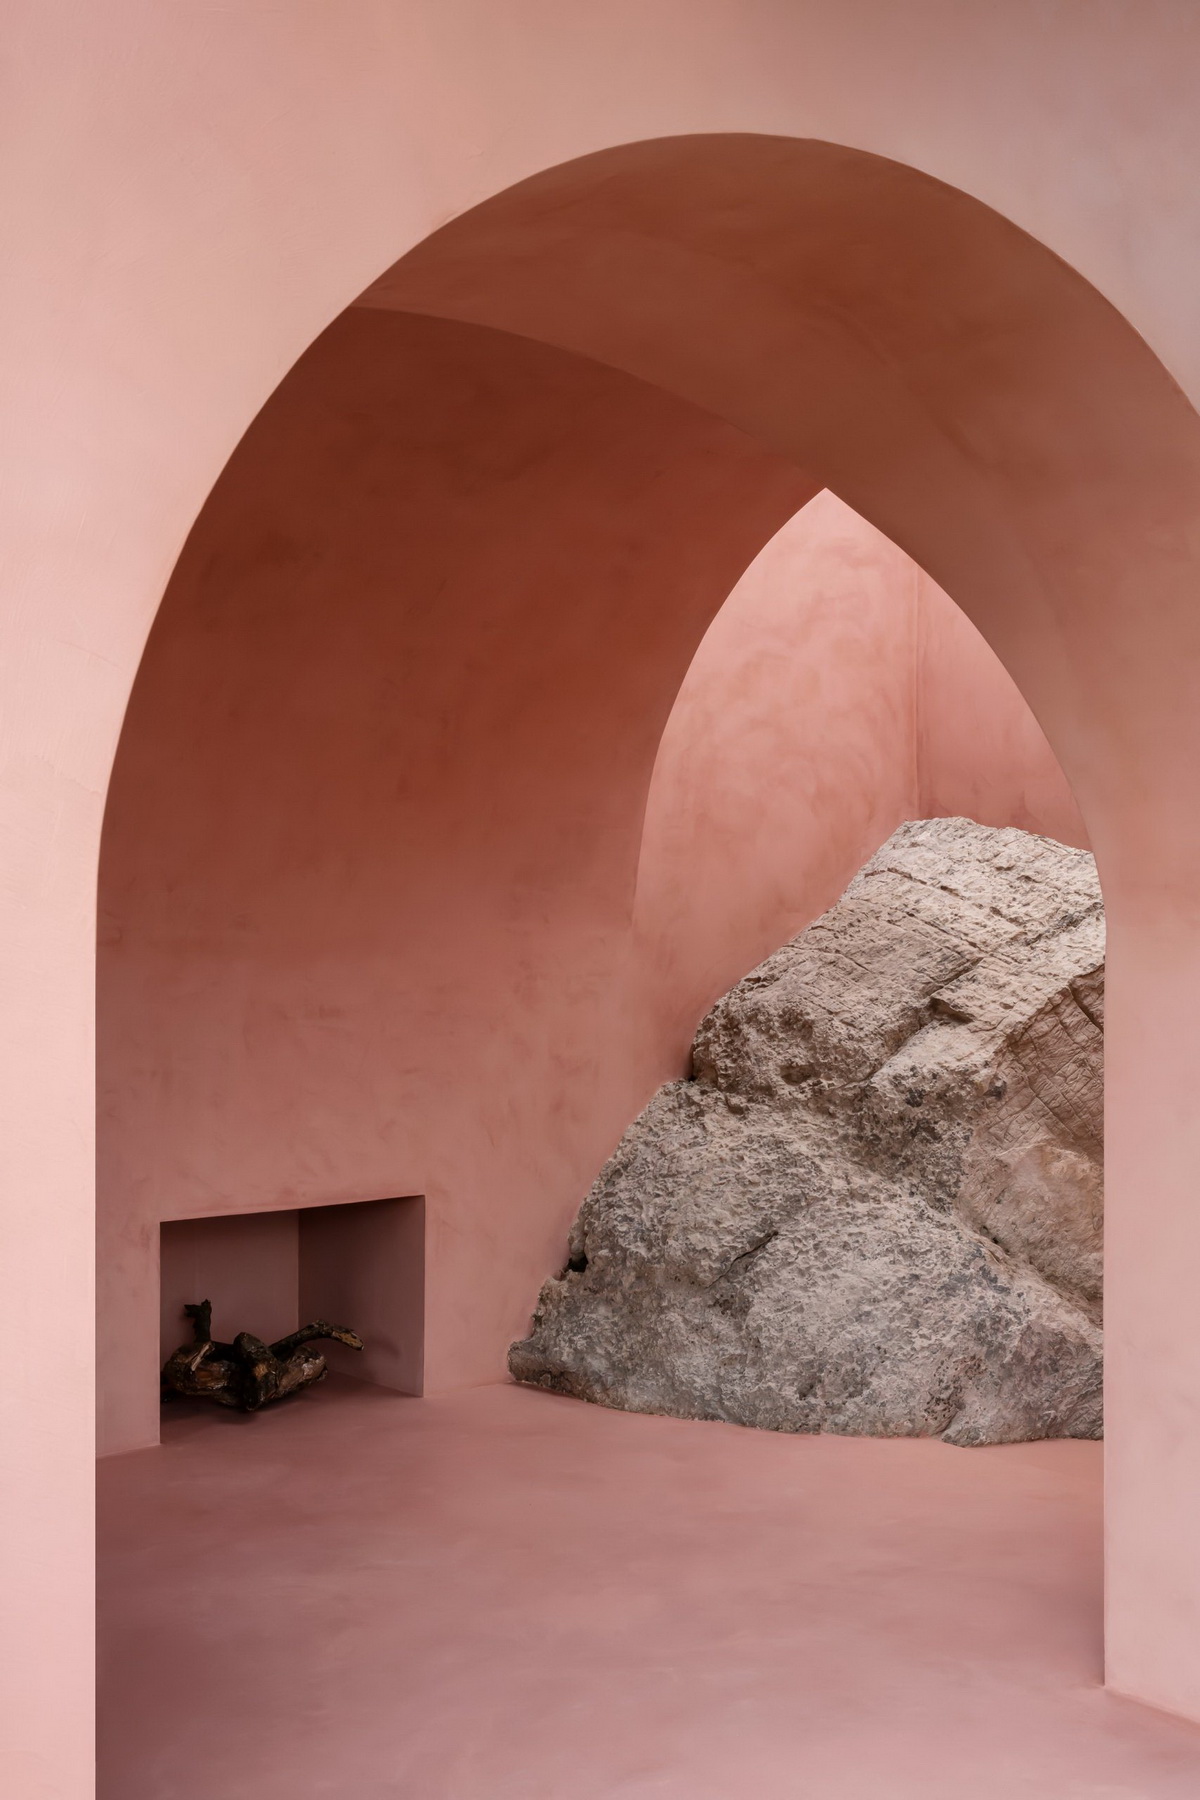 olive-houses-interiors-spain-mar-plus-ask-architecture_dezeen_2364_col_3-scaled_调整大小.jpg